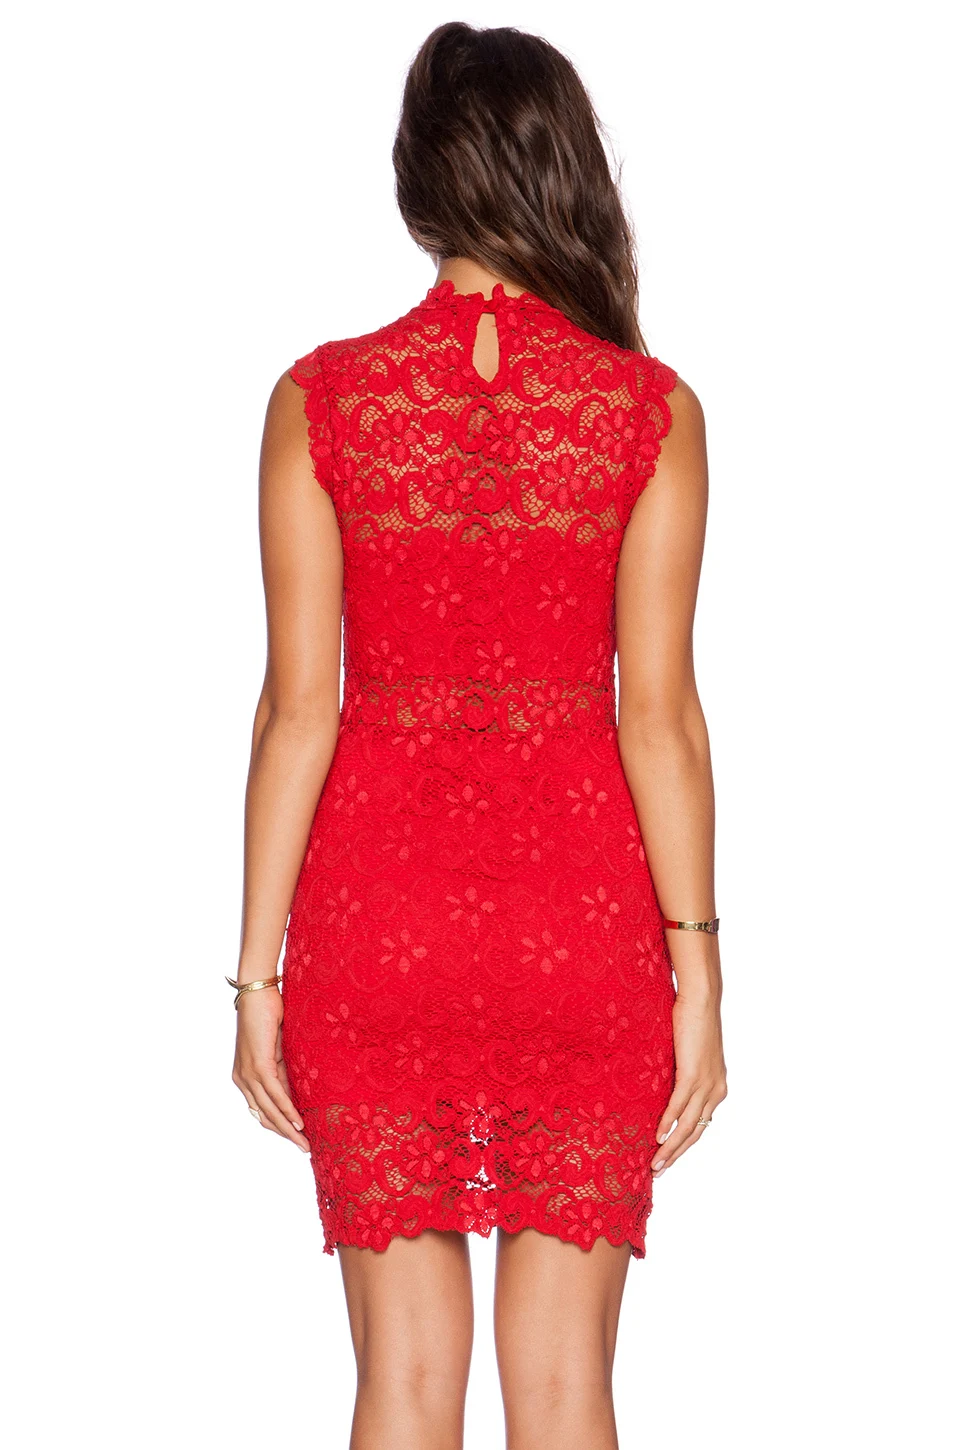 Women Red Short Tight Sexy Lace Cutout Mini Dress Buy Red Dressred